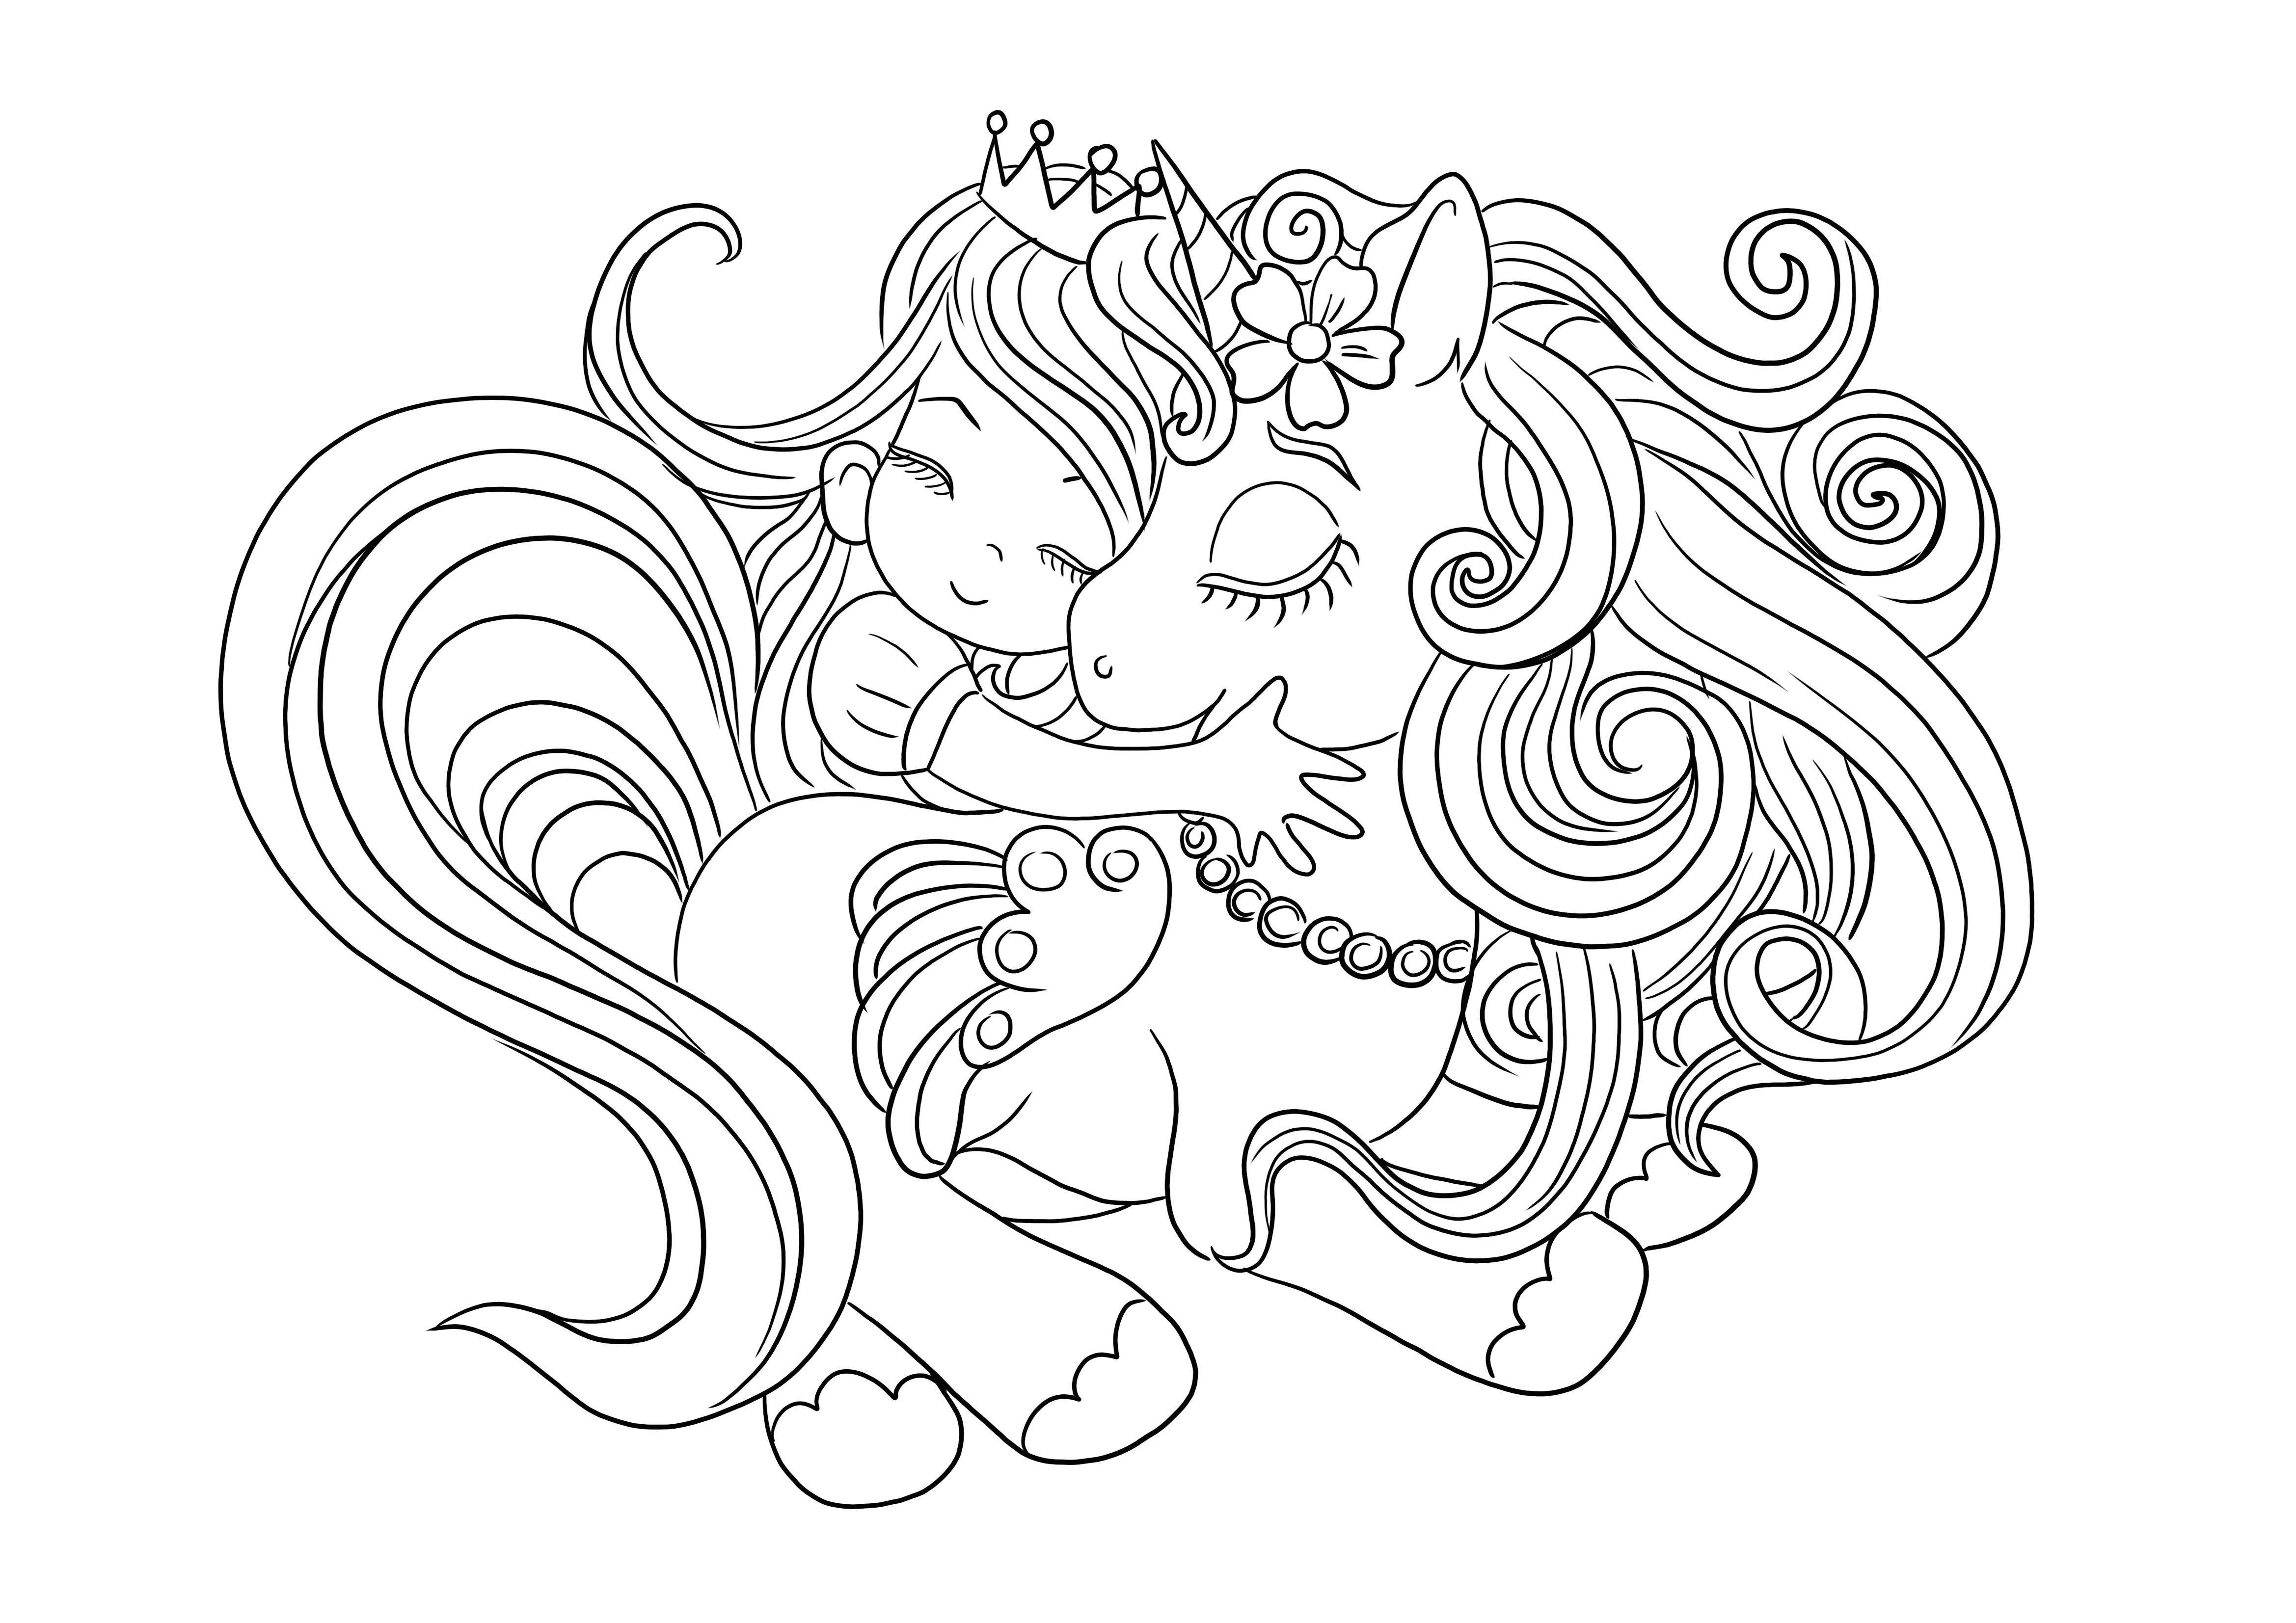 Unicorn and girl hugs to print and color for free for kids